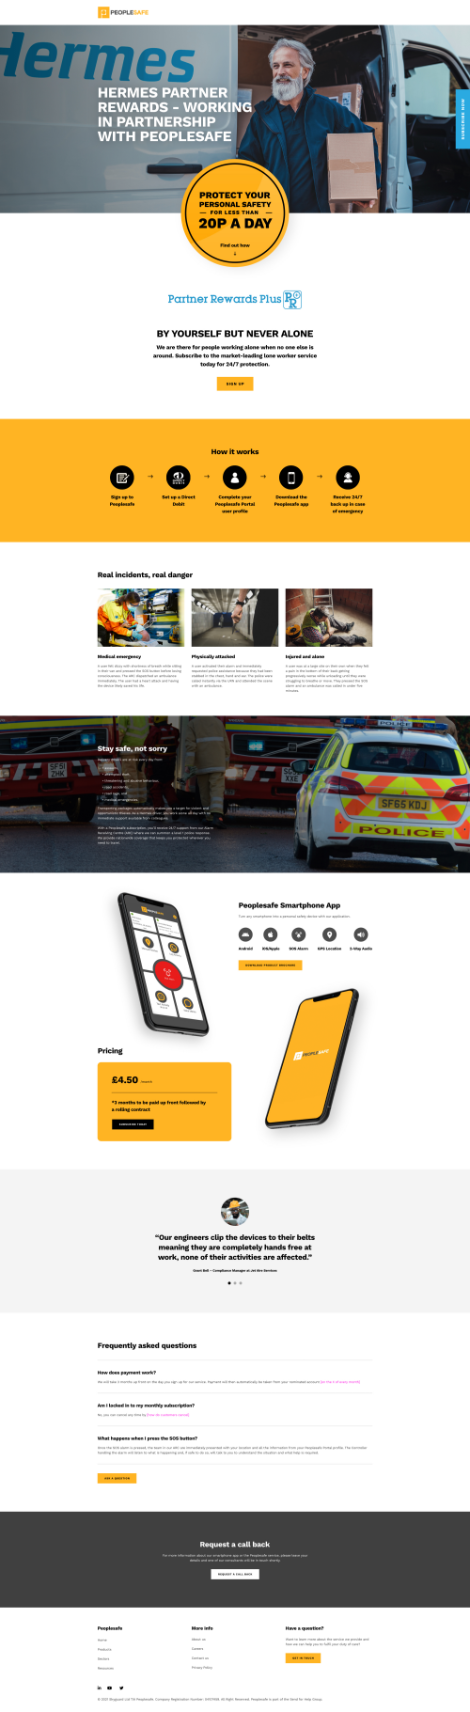 The layout of the Peoplesafe website